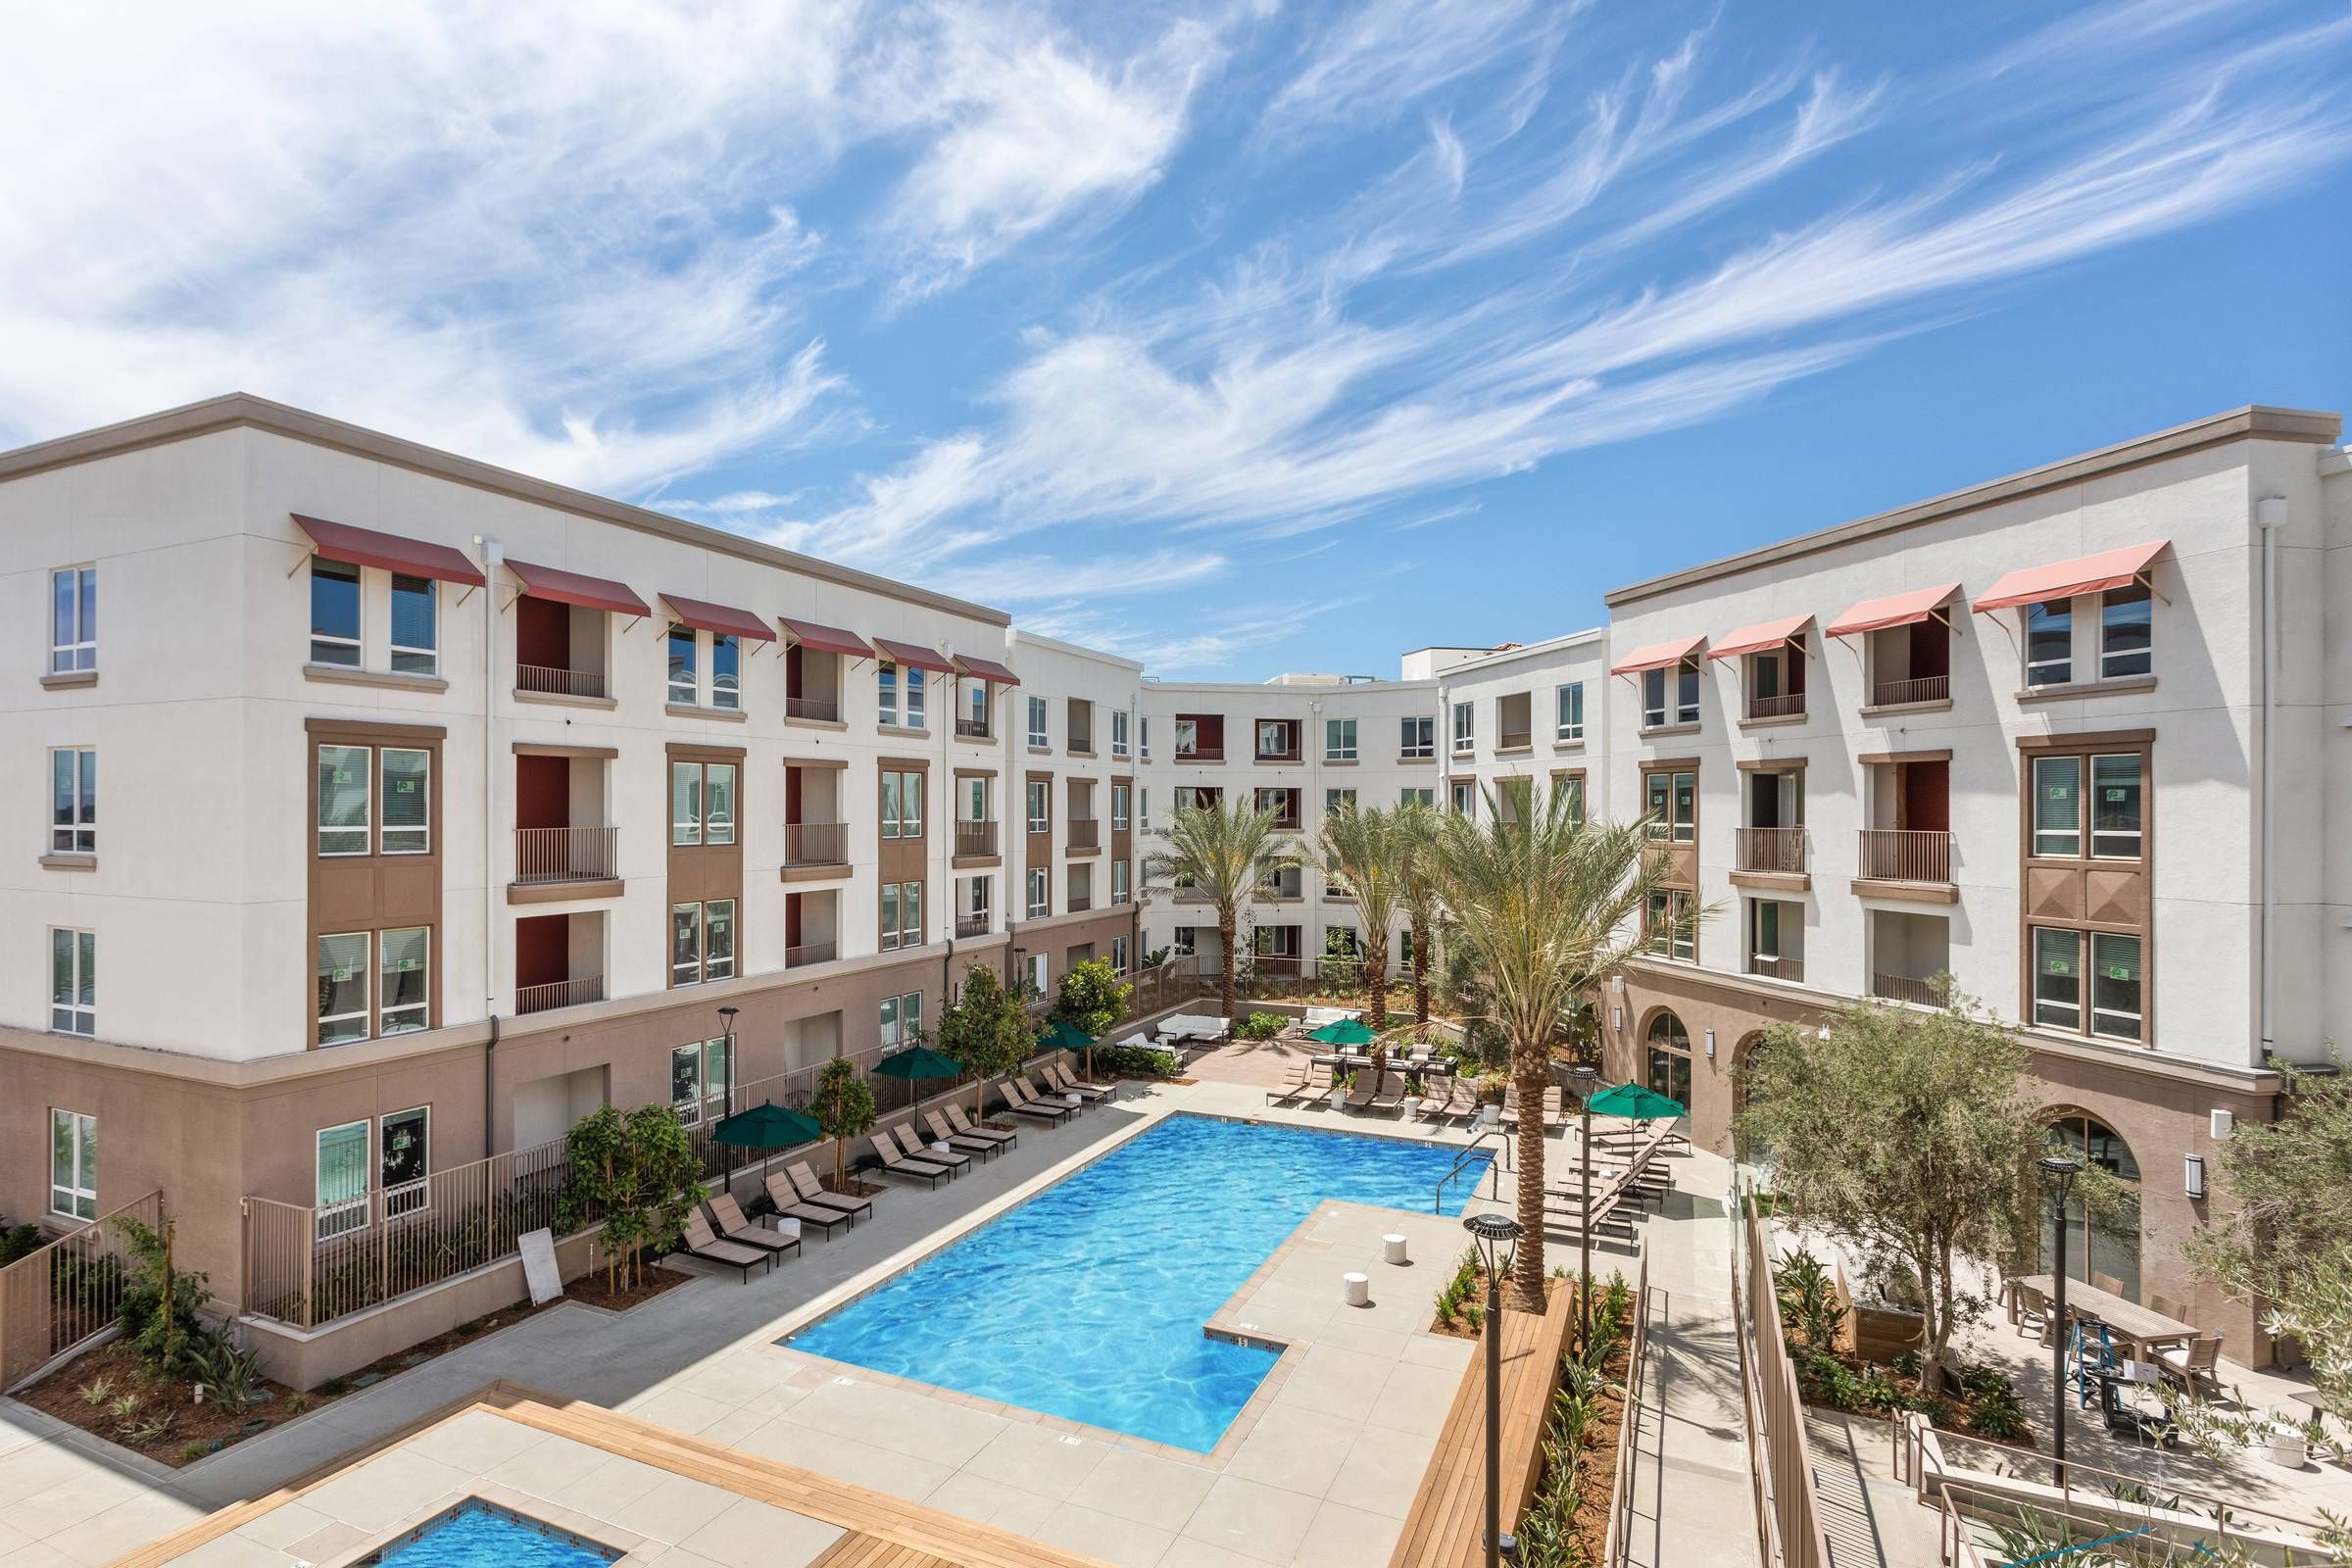 Alta Upland's luxurious outdoor pool is surrounded by sun loungers and palm trees, nestled within a modern apartment complex.